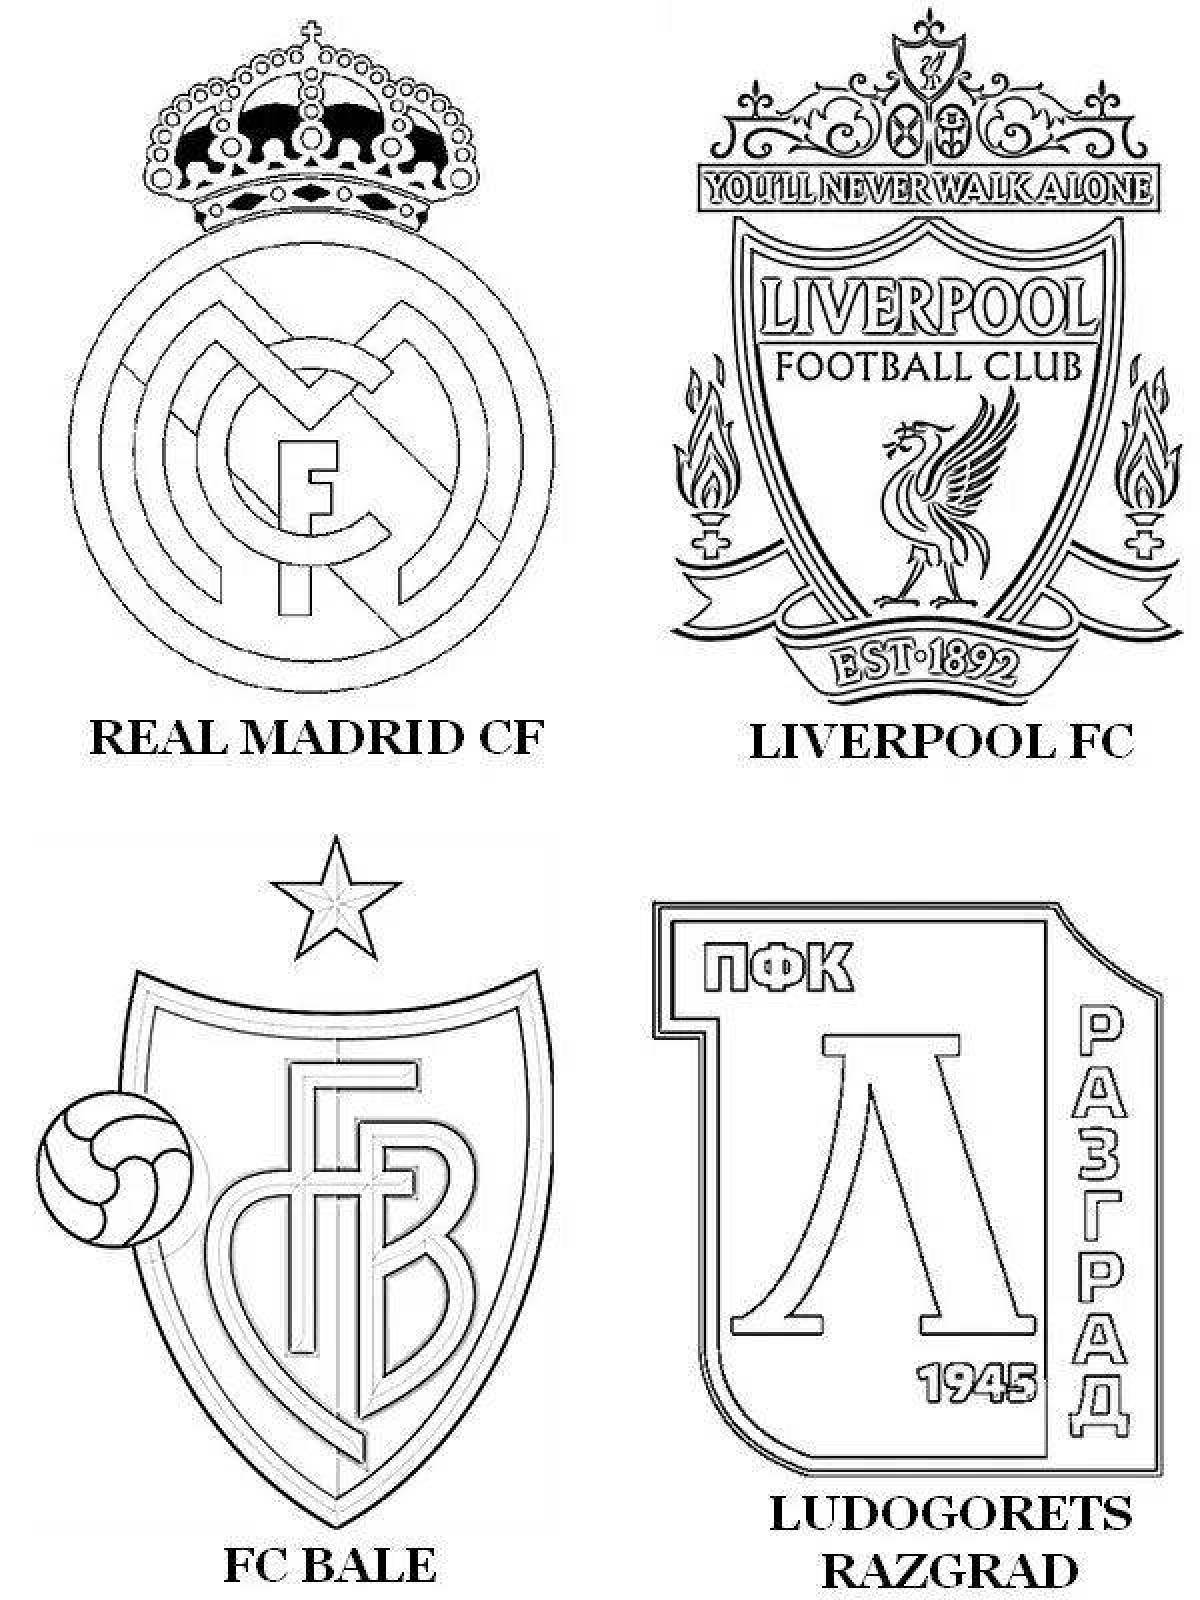 Artfully crafted real madrid coloring page